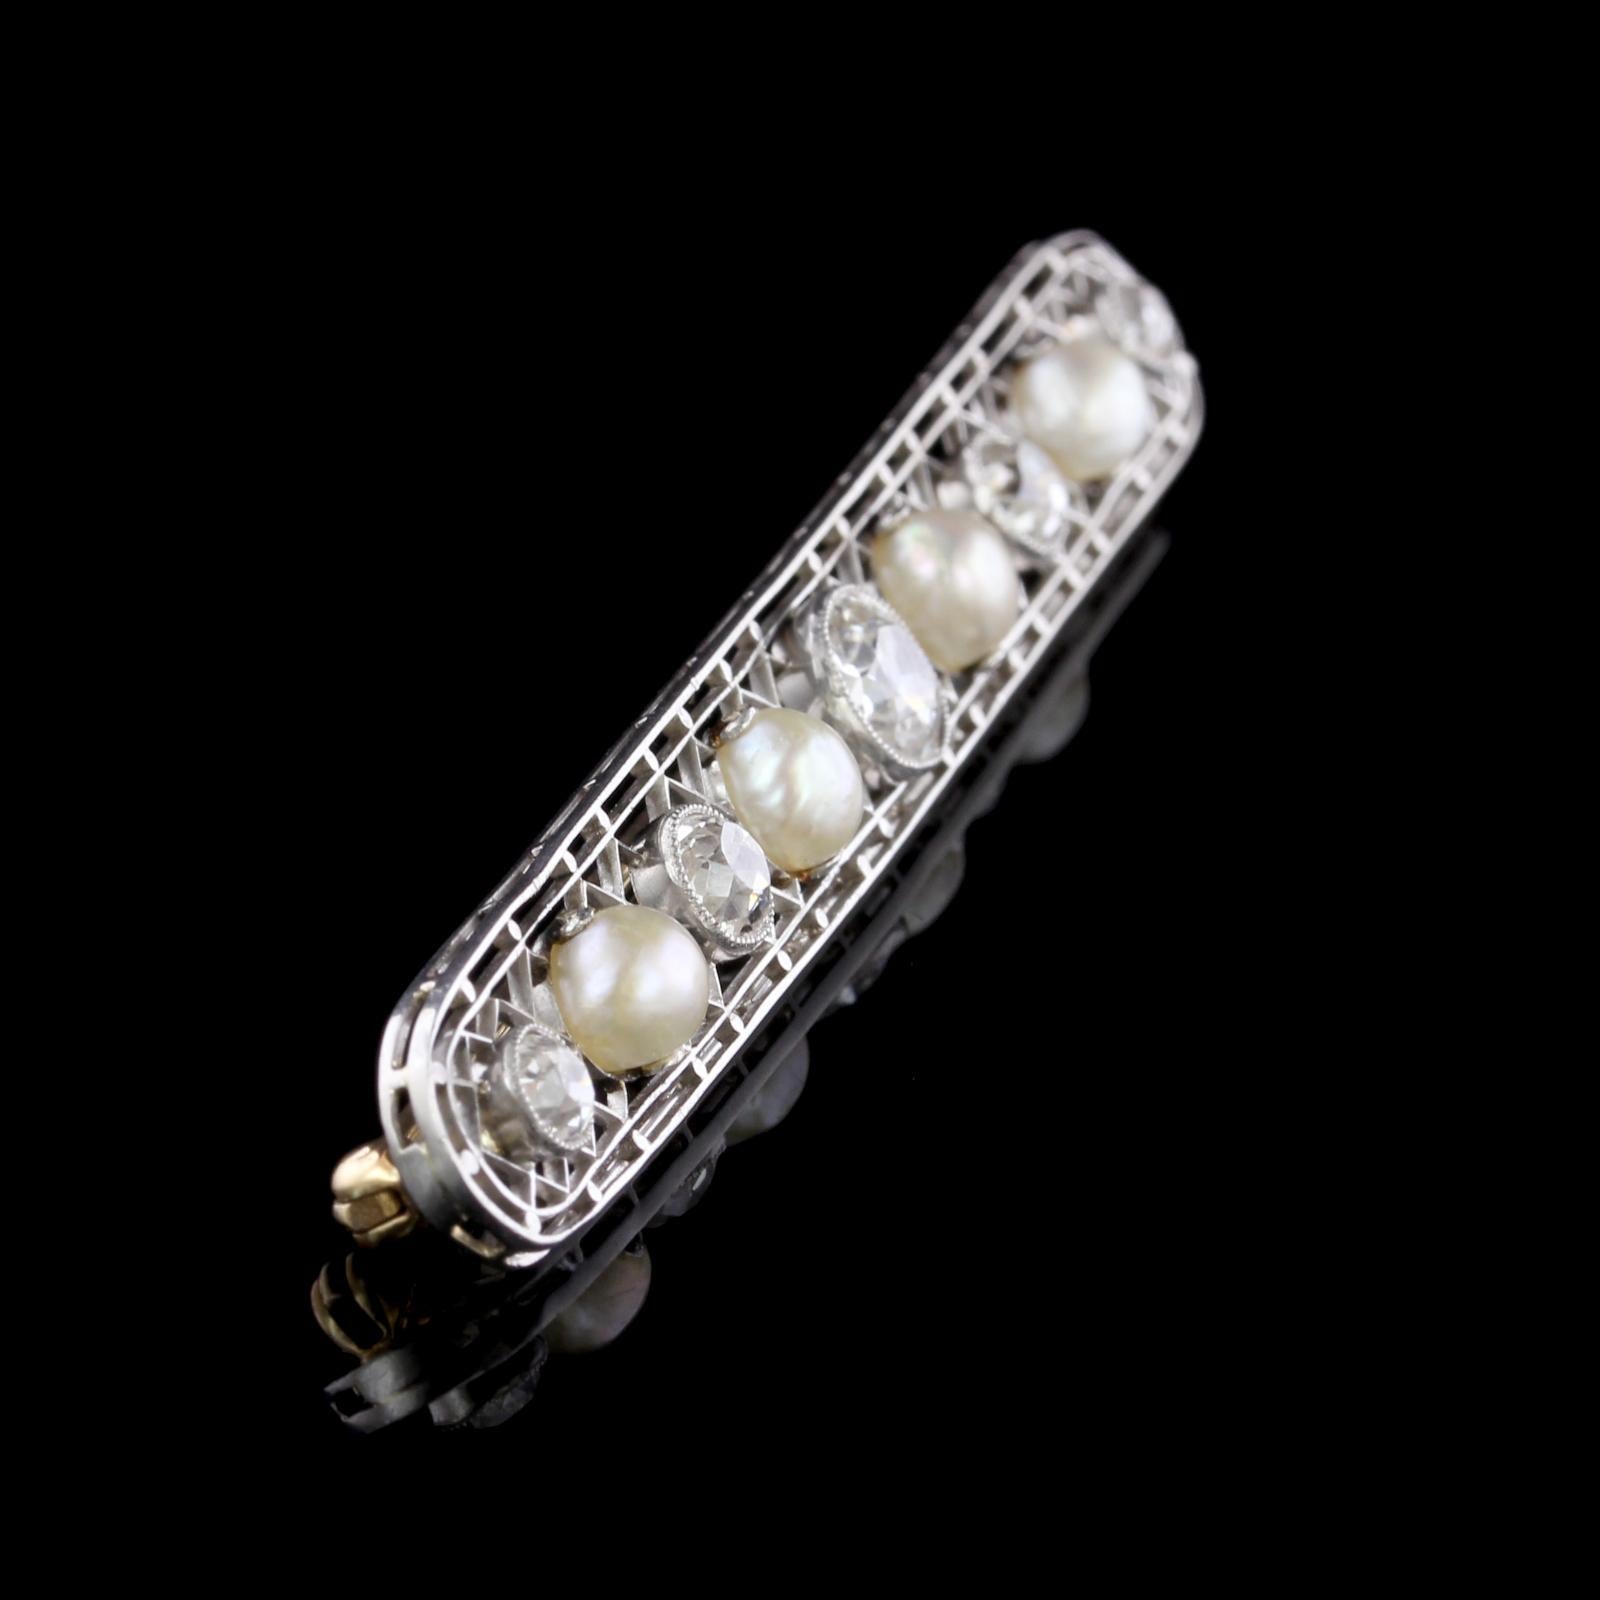 Antique Platinum Natural Pearl and Diamond Pin. The pin is set with 5 old mine cut diamonds weighing approx. 1.91cttw., I-J color, VS-SI clarity, further set with 4 natural pearls ranging in size from 5.34 to 5.80mm., GIA report #2175643818, stating